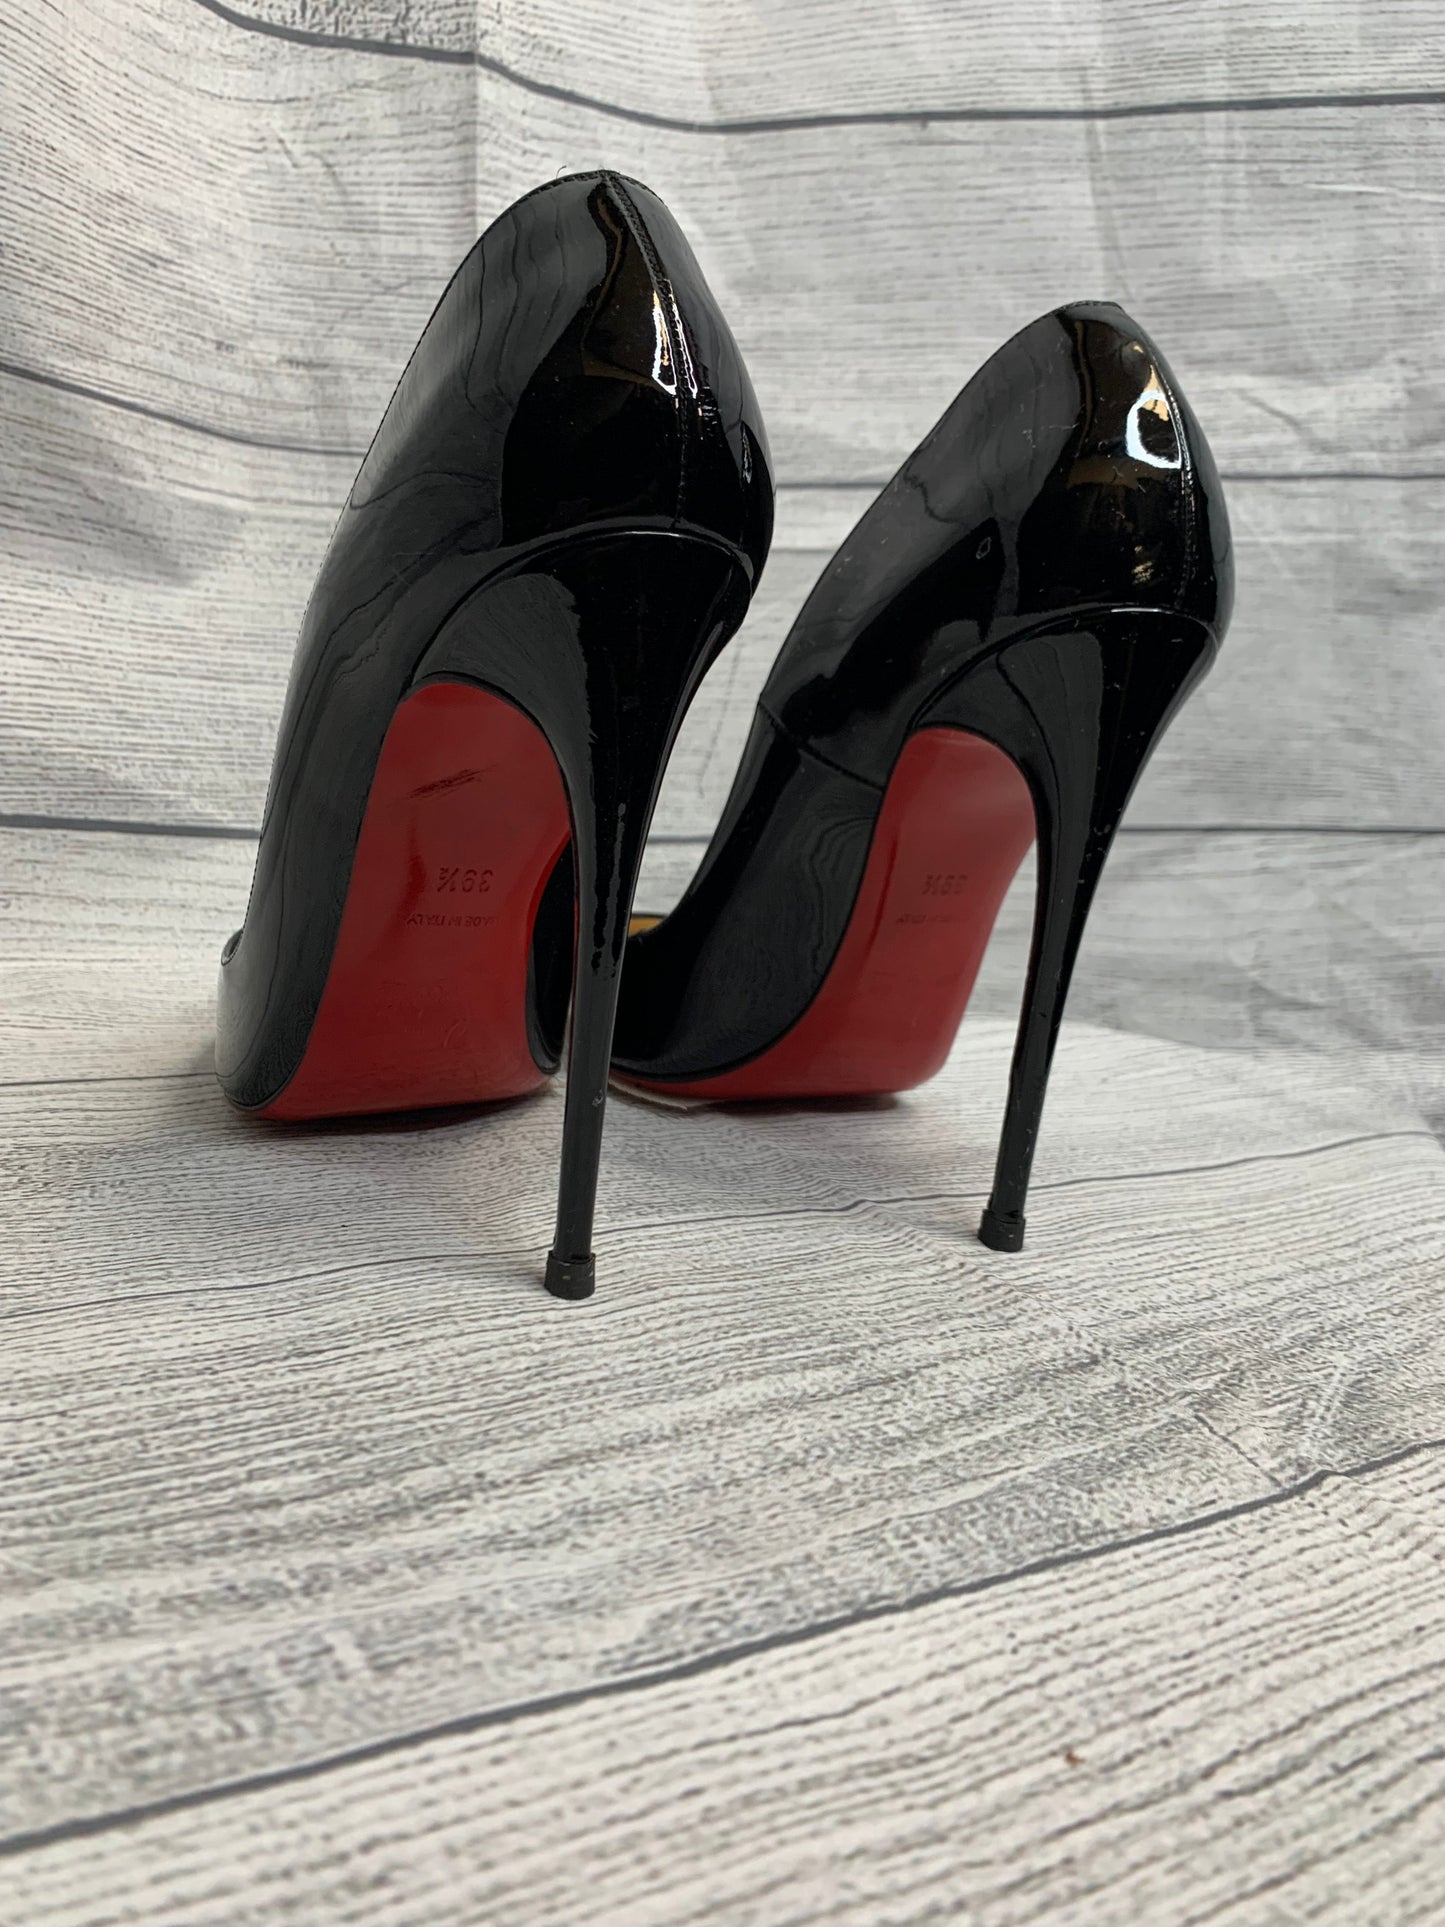 Shoes Heels Stiletto By Christian Louboutin  Size: 9